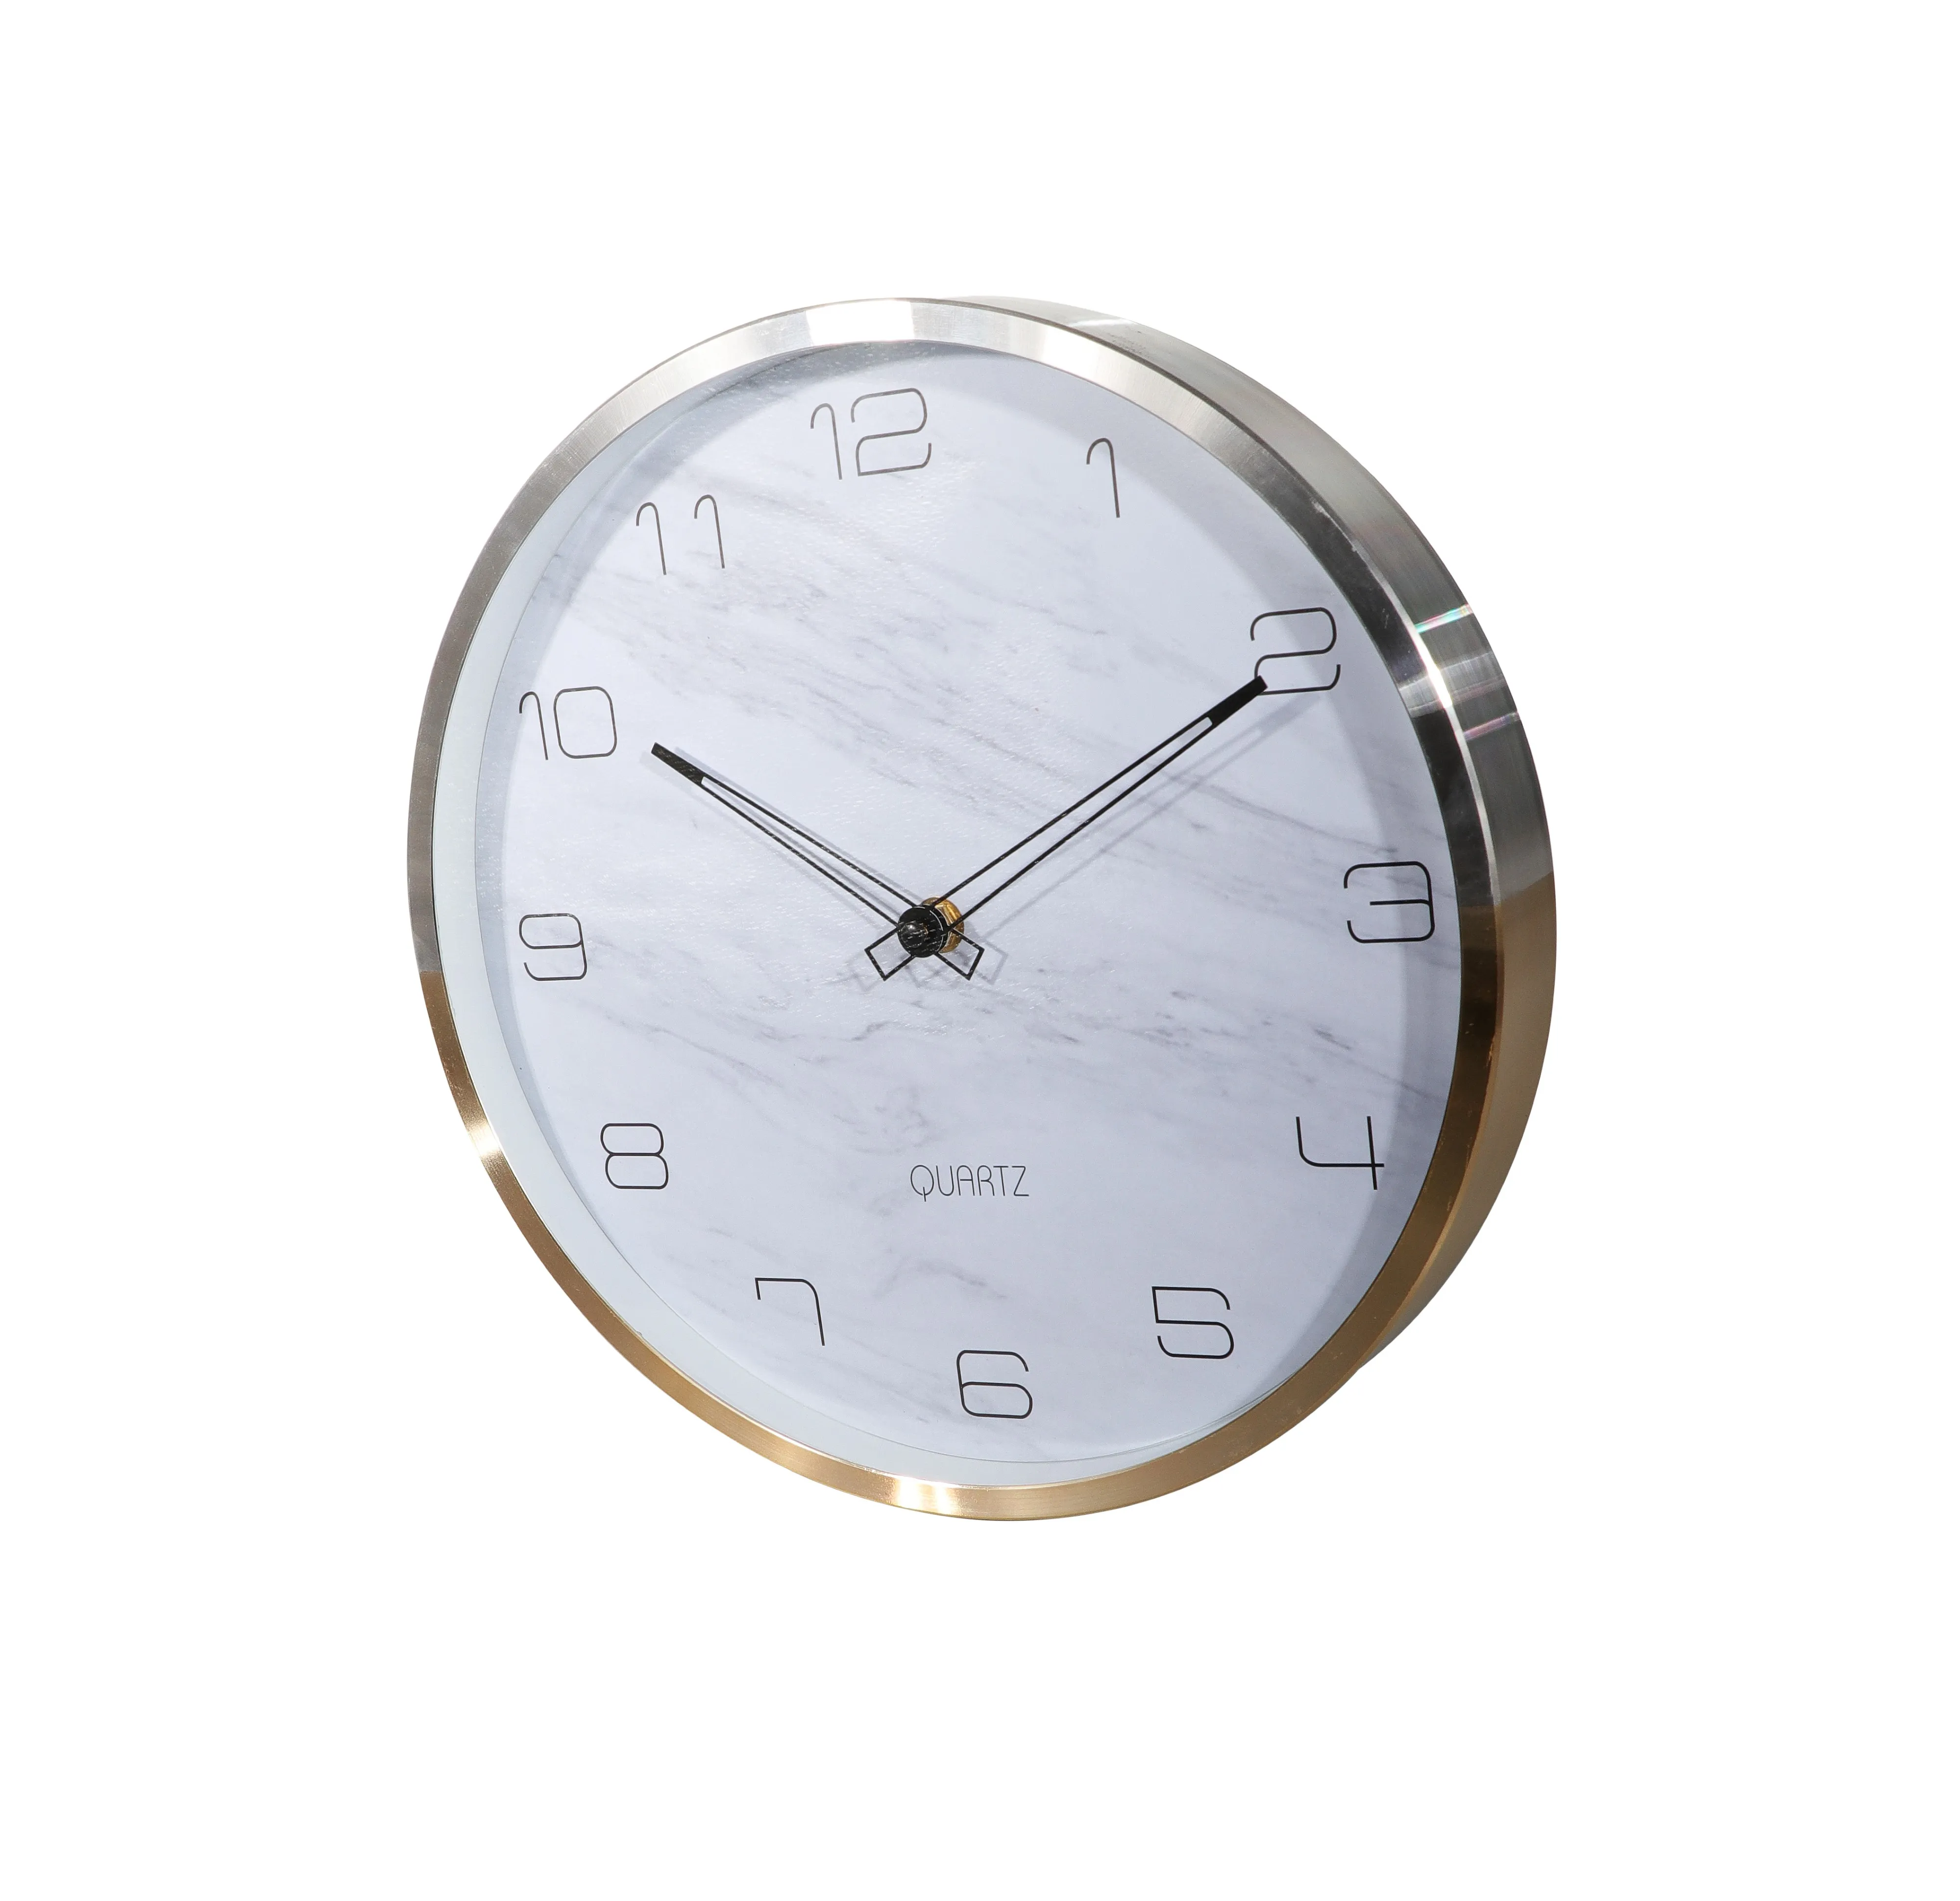 Royalford  RF9281 Wall Clock with Aluminium Frame- Silent Sweep Motion, Numeral Clock, Round Decorative Wall Clock for Living Room, Bedroom, Kitchen Aluminium Frame Silver & White